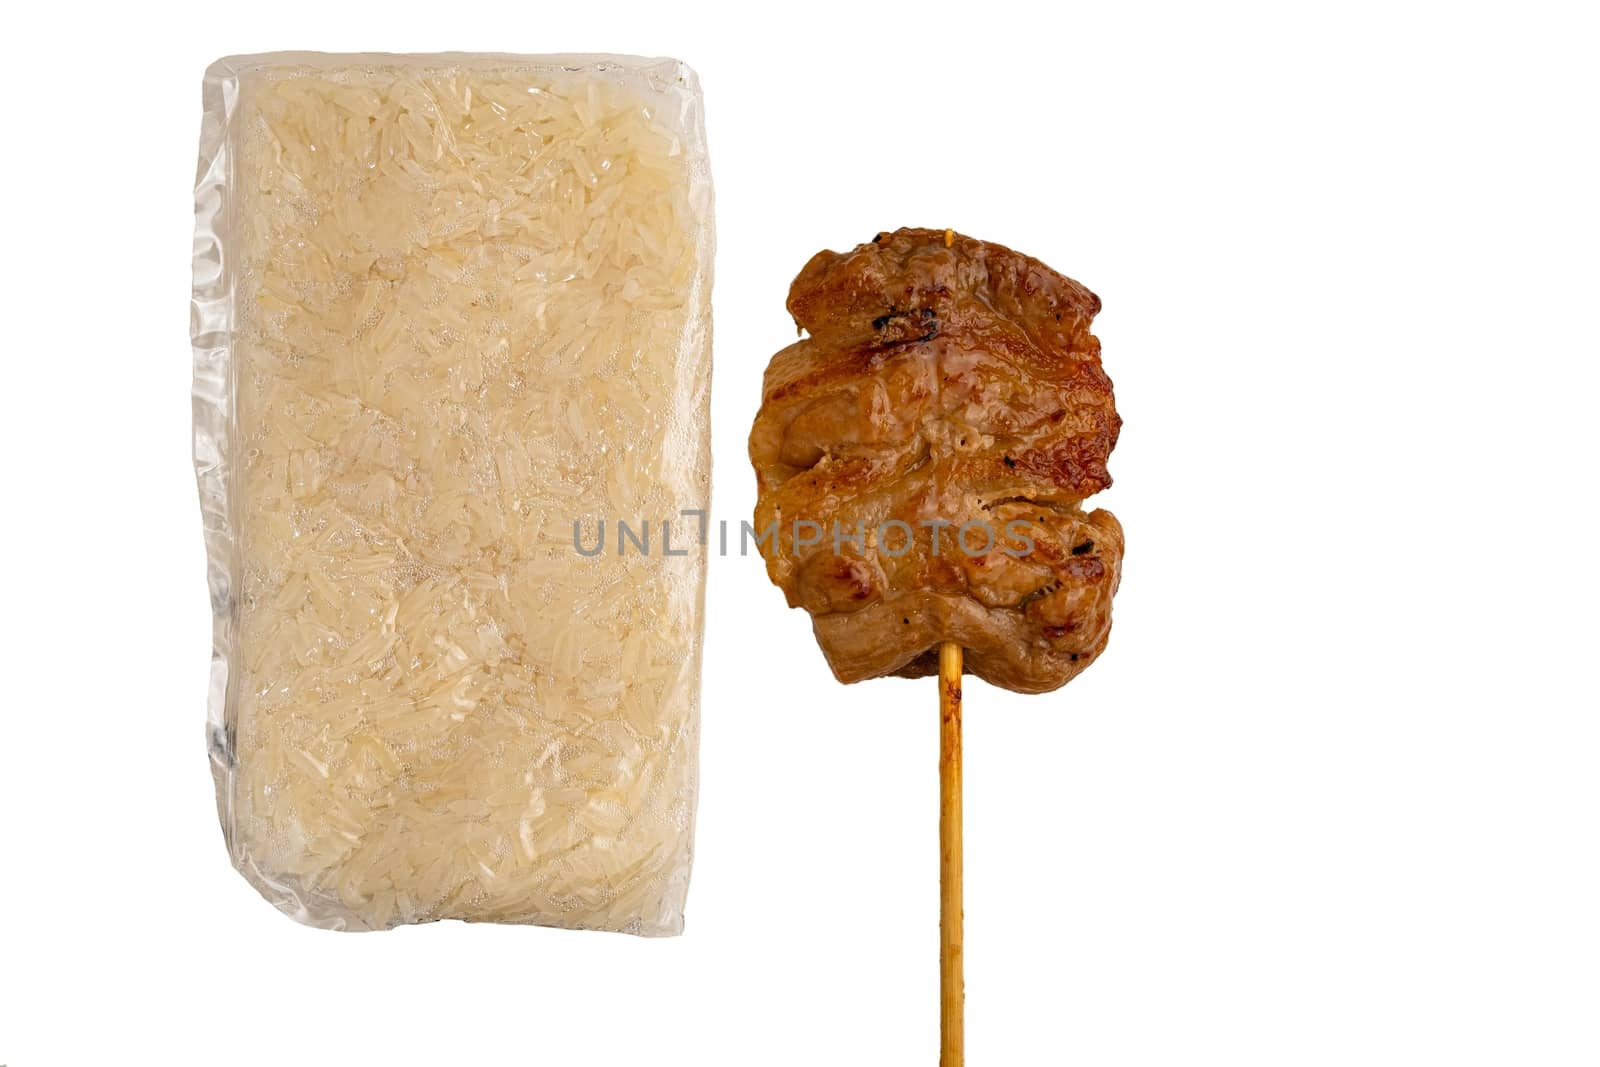 Grilled pork and glutinous rice of thai street fast food style isolated on white background